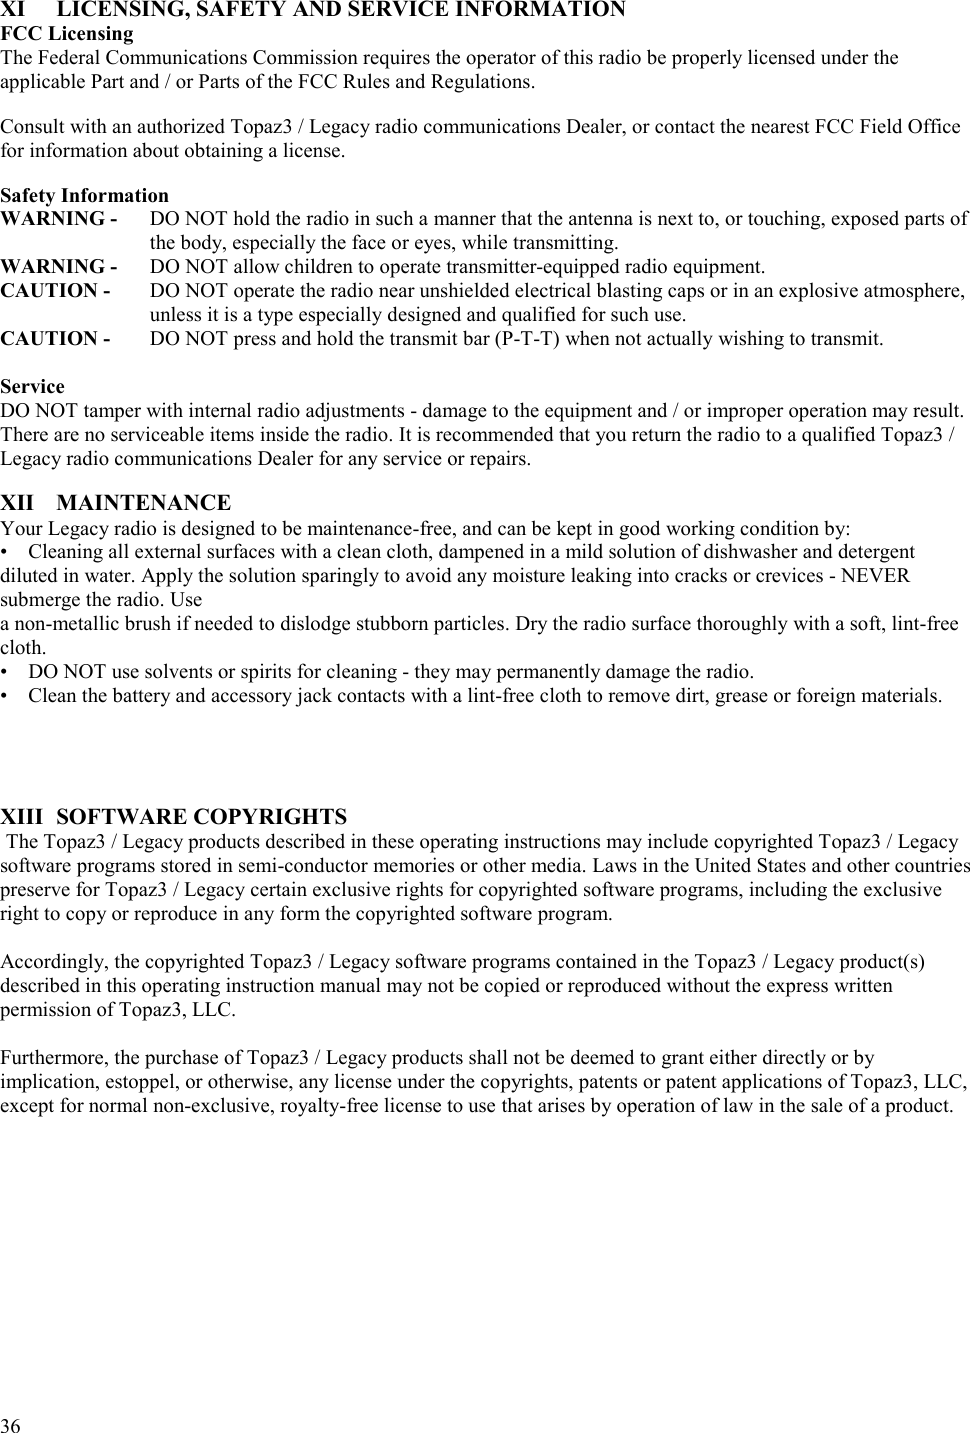  36   XI  LICENSING, SAFETY AND SERVICE INFORMATION FCC Licensing The Federal Communications Commission requires the operator of this radio be properly licensed under the applicable Part and / or Parts of the FCC Rules and Regulations.  Consult with an authorized Topaz3 / Legacy radio communications Dealer, or contact the nearest FCC Field Office for information about obtaining a license.  Safety Information WARNING -   DO NOT hold the radio in such a manner that the antenna is next to, or touching, exposed parts of the body, especially the face or eyes, while transmitting. WARNING -   DO NOT allow children to operate transmitter-equipped radio equipment.  CAUTION -   DO NOT operate the radio near unshielded electrical blasting caps or in an explosive atmosphere, unless it is a type especially designed and qualified for such use.  CAUTION -   DO NOT press and hold the transmit bar (P-T-T) when not actually wishing to transmit.  Service DO NOT tamper with internal radio adjustments - damage to the equipment and / or improper operation may result. There are no serviceable items inside the radio. It is recommended that you return the radio to a qualified Topaz3 / Legacy radio communications Dealer for any service or repairs.  XII MAINTENANCE Your Legacy radio is designed to be maintenance-free, and can be kept in good working condition by:  •  Cleaning all external surfaces with a clean cloth, dampened in a mild solution of dishwasher and detergent diluted in water. Apply the solution sparingly to avoid any moisture leaking into cracks or crevices - NEVER submerge the radio. Use  a non-metallic brush if needed to dislodge stubborn particles. Dry the radio surface thoroughly with a soft, lint-free cloth.   •  DO NOT use solvents or spirits for cleaning - they may permanently damage the radio.   •  Clean the battery and accessory jack contacts with a lint-free cloth to remove dirt, grease or foreign materials.        XIII SOFTWARE COPYRIGHTS  The Topaz3 / Legacy products described in these operating instructions may include copyrighted Topaz3 / Legacy software programs stored in semi-conductor memories or other media. Laws in the United States and other countries preserve for Topaz3 / Legacy certain exclusive rights for copyrighted software programs, including the exclusive right to copy or reproduce in any form the copyrighted software program.   Accordingly, the copyrighted Topaz3 / Legacy software programs contained in the Topaz3 / Legacy product(s) described in this operating instruction manual may not be copied or reproduced without the express written permission of Topaz3, LLC.   Furthermore, the purchase of Topaz3 / Legacy products shall not be deemed to grant either directly or by implication, estoppel, or otherwise, any license under the copyrights, patents or patent applications of Topaz3, LLC, except for normal non-exclusive, royalty-free license to use that arises by operation of law in the sale of a product.  